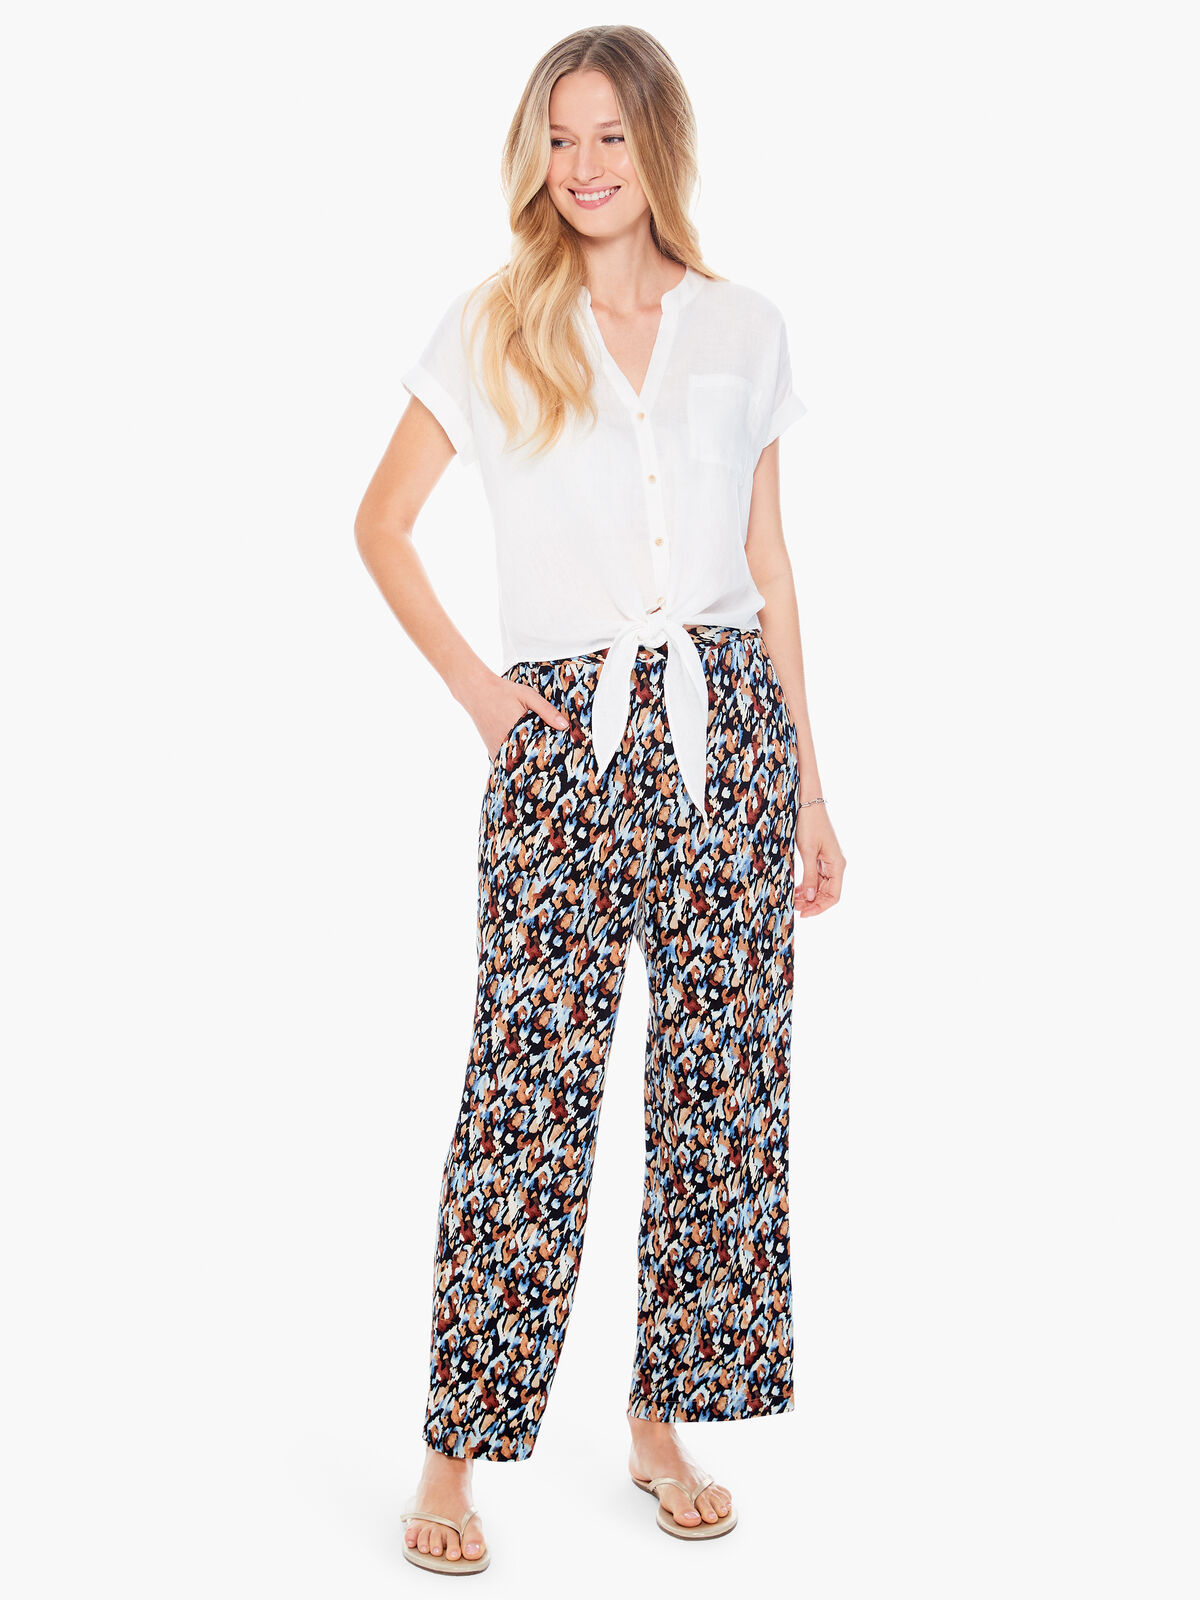 Painted Leopard Printed Pant